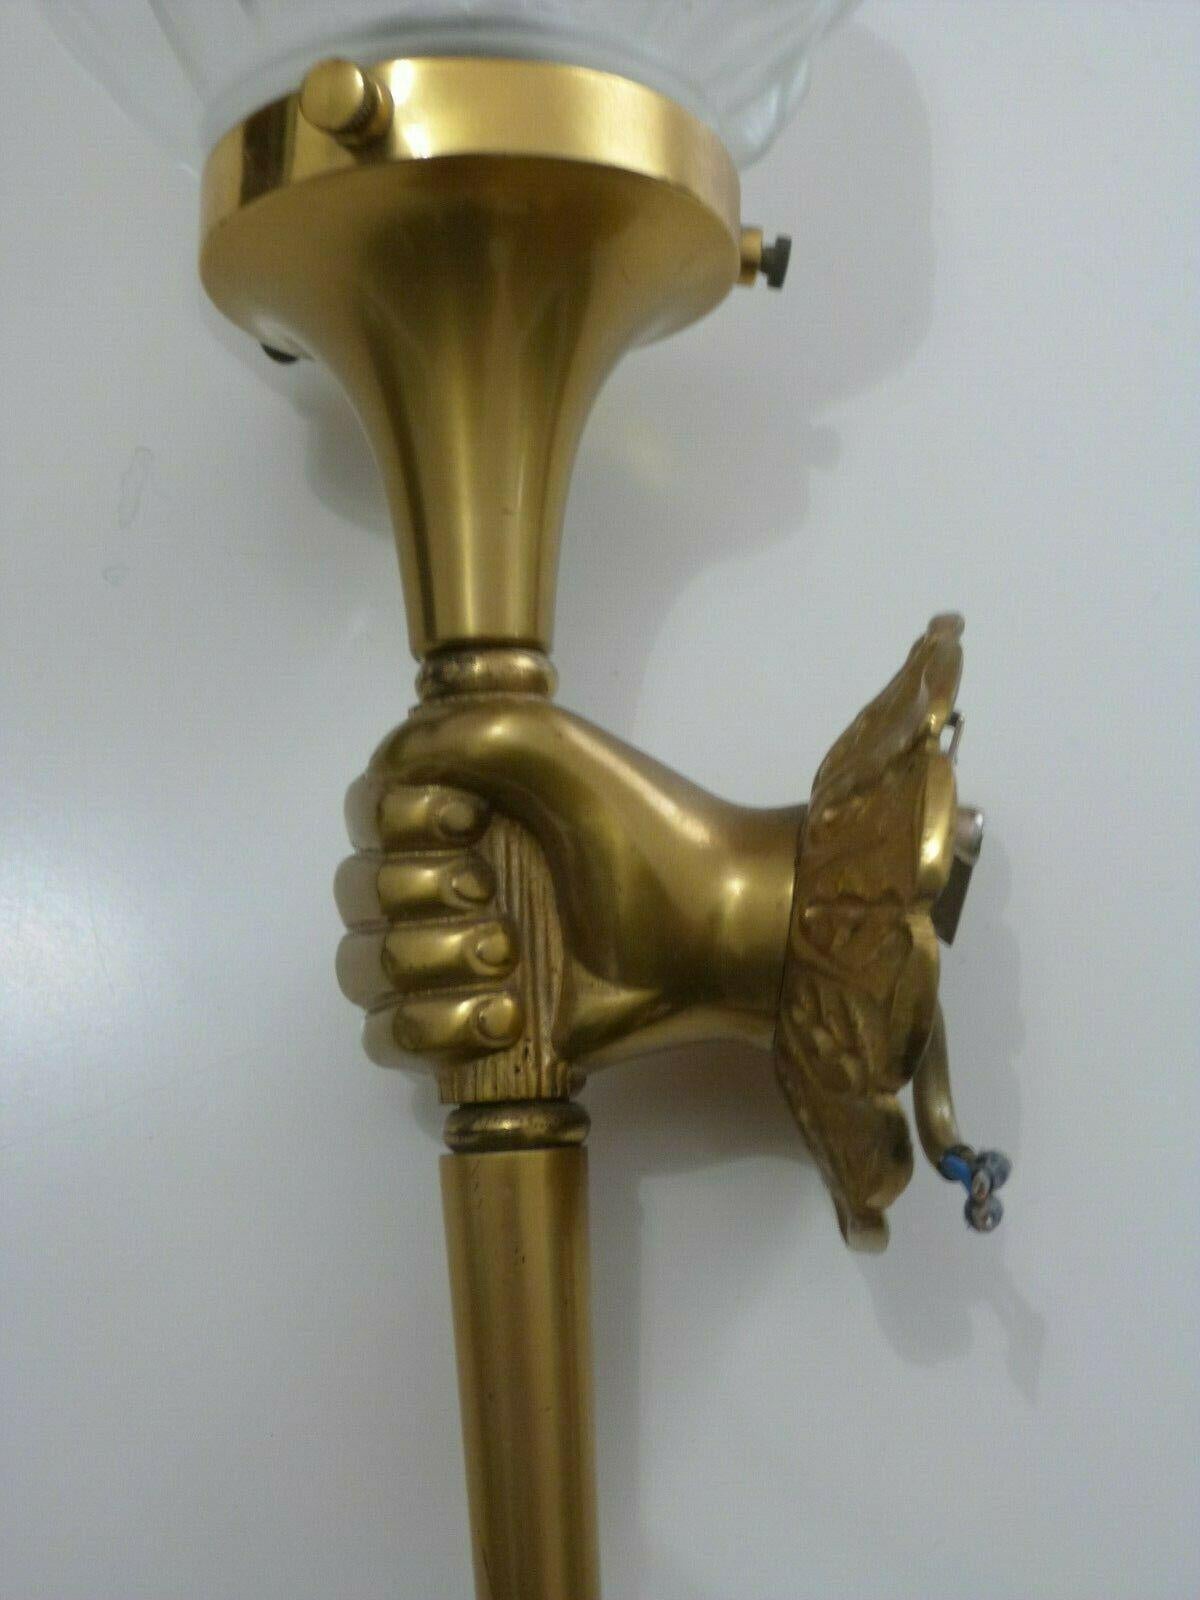 1930's French Art Deco Gilt Bronze Hand / Fist Holding Torch Wall Sconce  In Good Condition For Sale In Opa Locka, FL